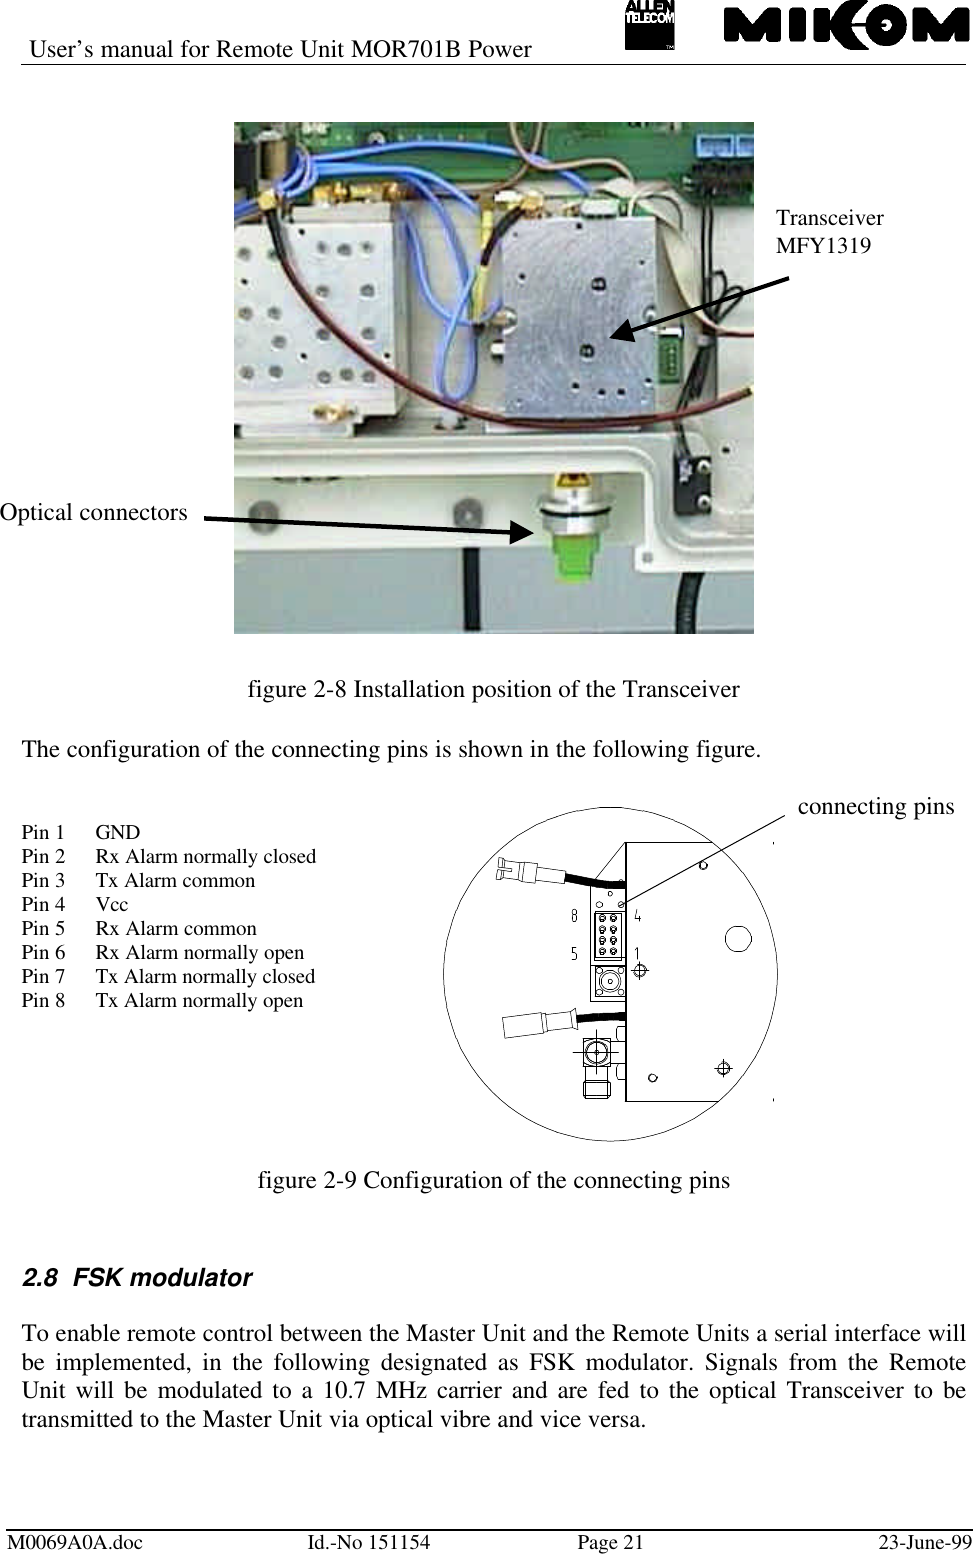 User’s manual for Remote Unit MOR701B PowerM0069A0A.doc Id.-No 151154 Page 21 23-June-99figure 2-8 Installation position of the TransceiverThe configuration of the connecting pins is shown in the following figure.Pin 1 GNDPin 2 Rx Alarm normally closedPin 3 Tx Alarm commonPin 4 VccPin 5 Rx Alarm commonPin 6 Rx Alarm normally openPin 7 Tx Alarm normally closedPin 8 Tx Alarm normally openfigure 2-9 Configuration of the connecting pins2.8 FSK modulatorTo enable remote control between the Master Unit and the Remote Units a serial interface willbe implemented, in the following designated as FSK modulator. Signals from the RemoteUnit will be modulated to a 10.7 MHz carrier and are fed to the optical Transceiver to betransmitted to the Master Unit via optical vibre and vice versa.TransceiverMFY1319Optical connectorsconnecting pins